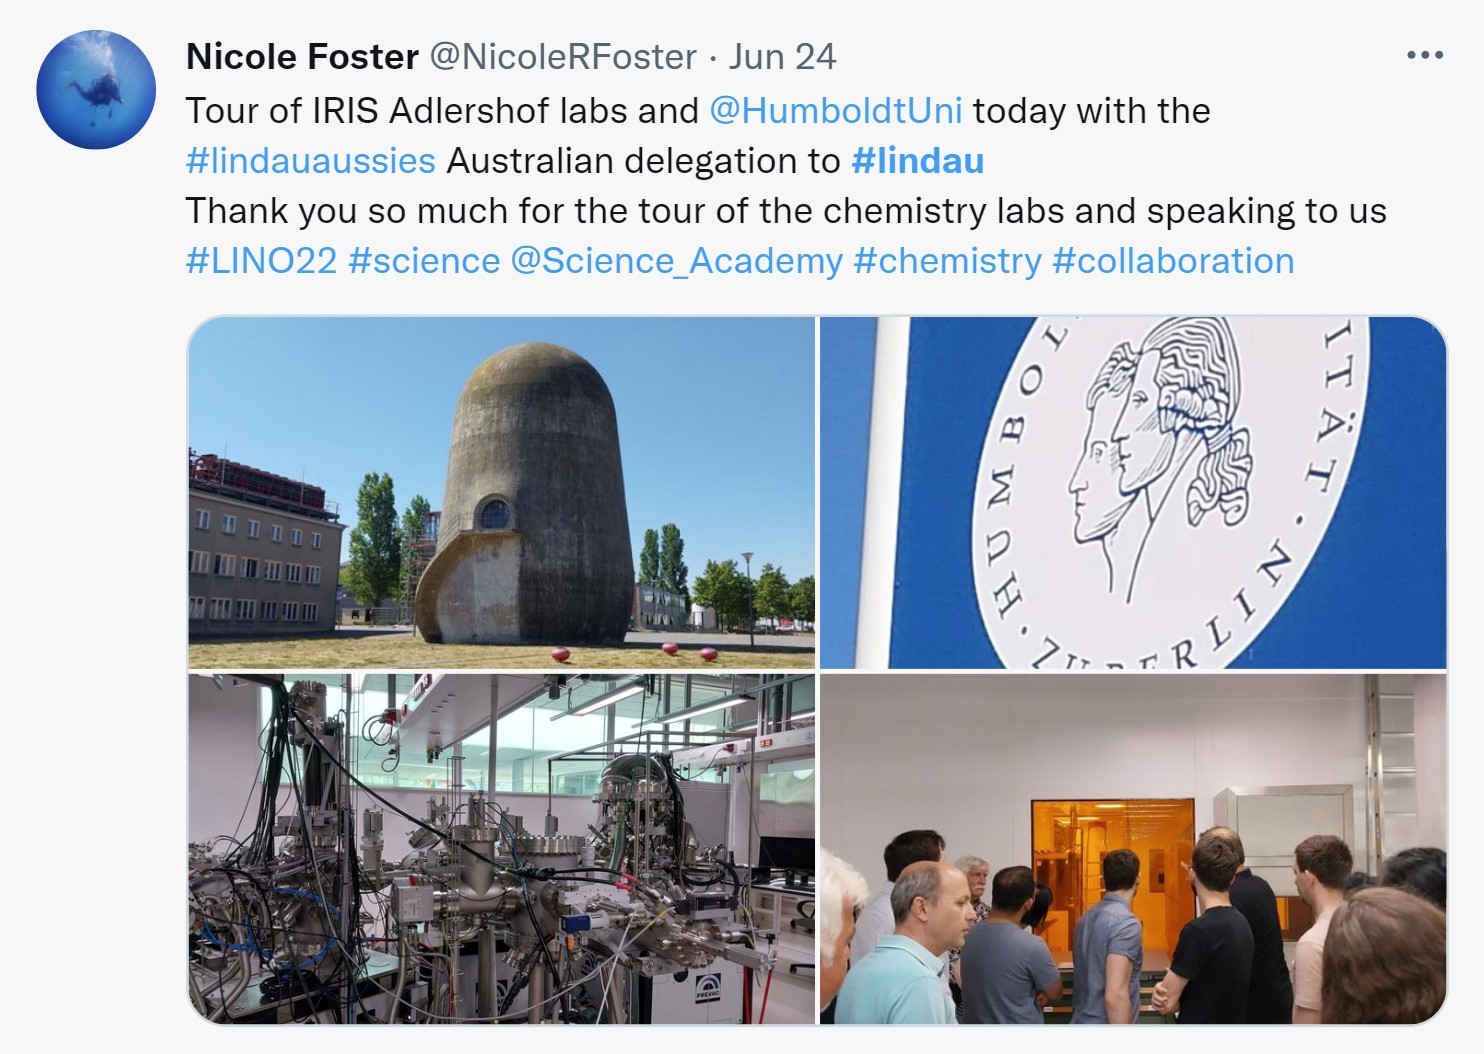 Tweet from Dr Nicole Foster on June 24 “Tour of IRIS Adlershof labs at Humboldt university today with the #lindauaussies Australian delegation to Lindau. Thank you so much for the tour of the chemistry labs and speaking to us #LINO22 #science.” Four pictures of the delegates tour around Humboldt University. The first picture is of a cylindrical building, the second picture is the Humboldt university logo, the third picture is of chemistry lab equipment, and the fourth picture is of the delegates looking at chemistry equipment. 